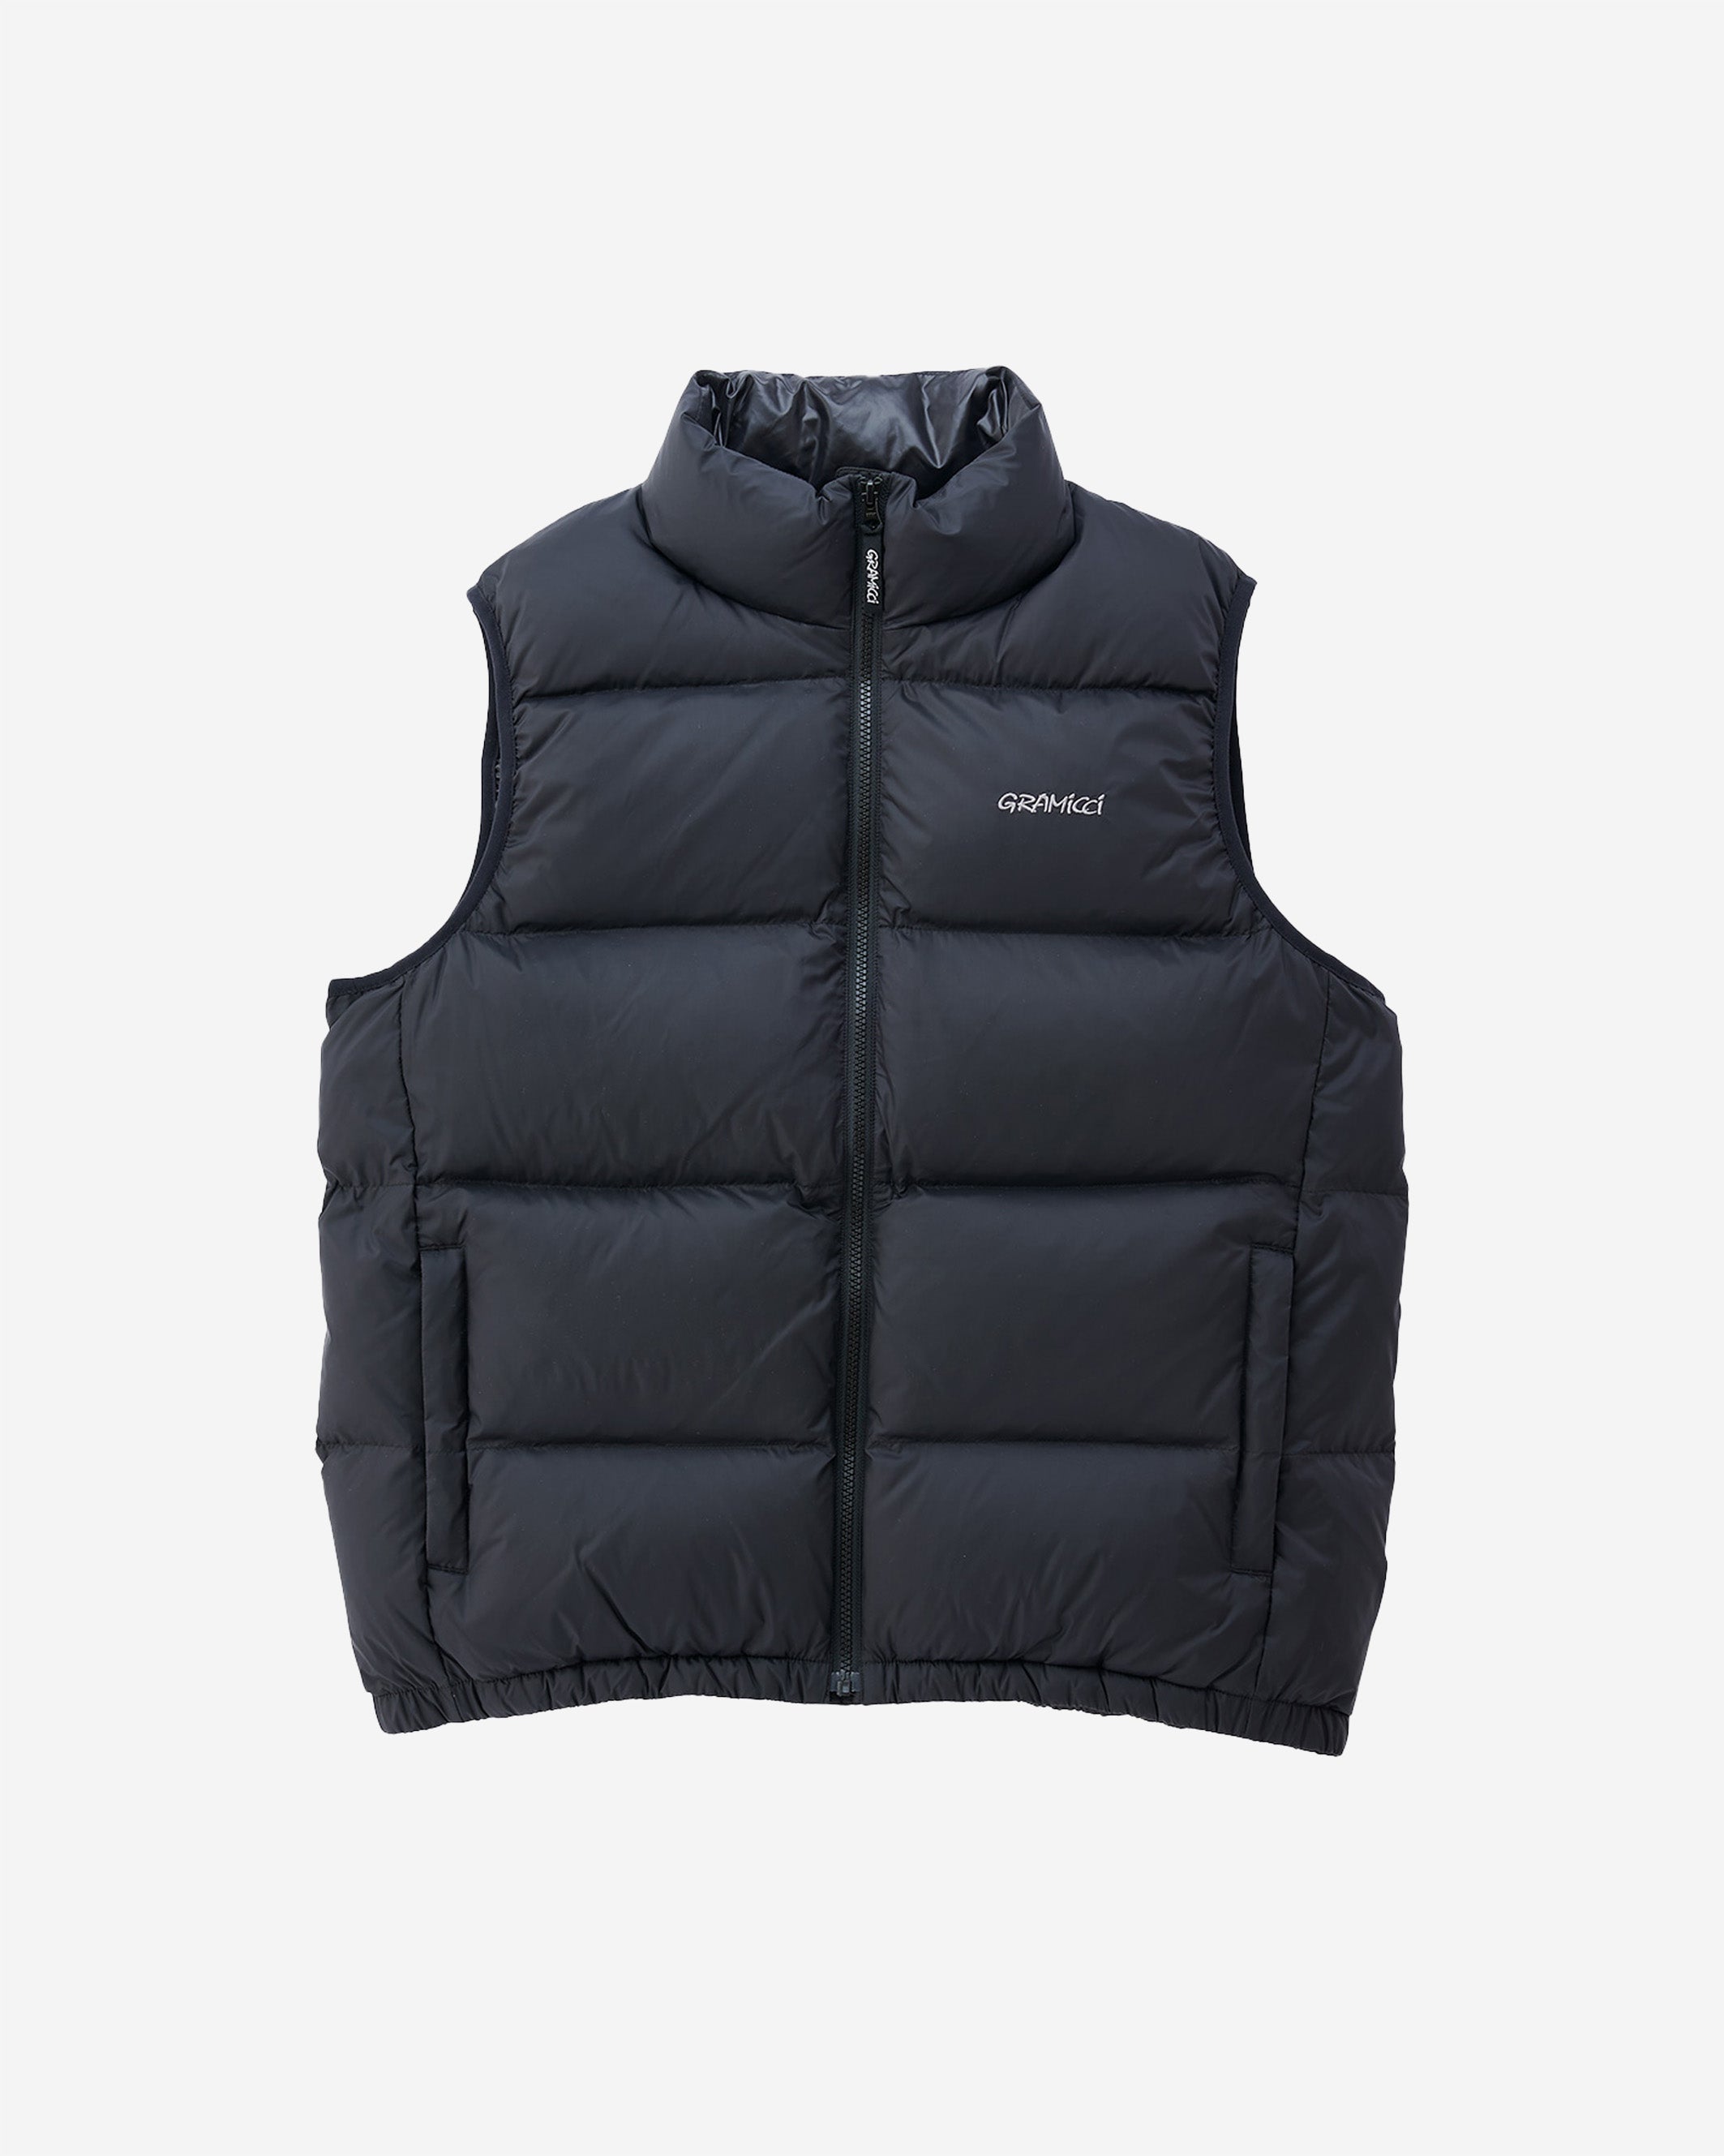 The Gramicci Down Puffer Vest is a great outerwear piece that is functional and fashionable. You can layer this down vest with a coat for colder days or wear over a t-shirt during warmer months. This comfortable vest is made with high-density, soft-textured taffeta that is made with 80% down and 20% feathers.